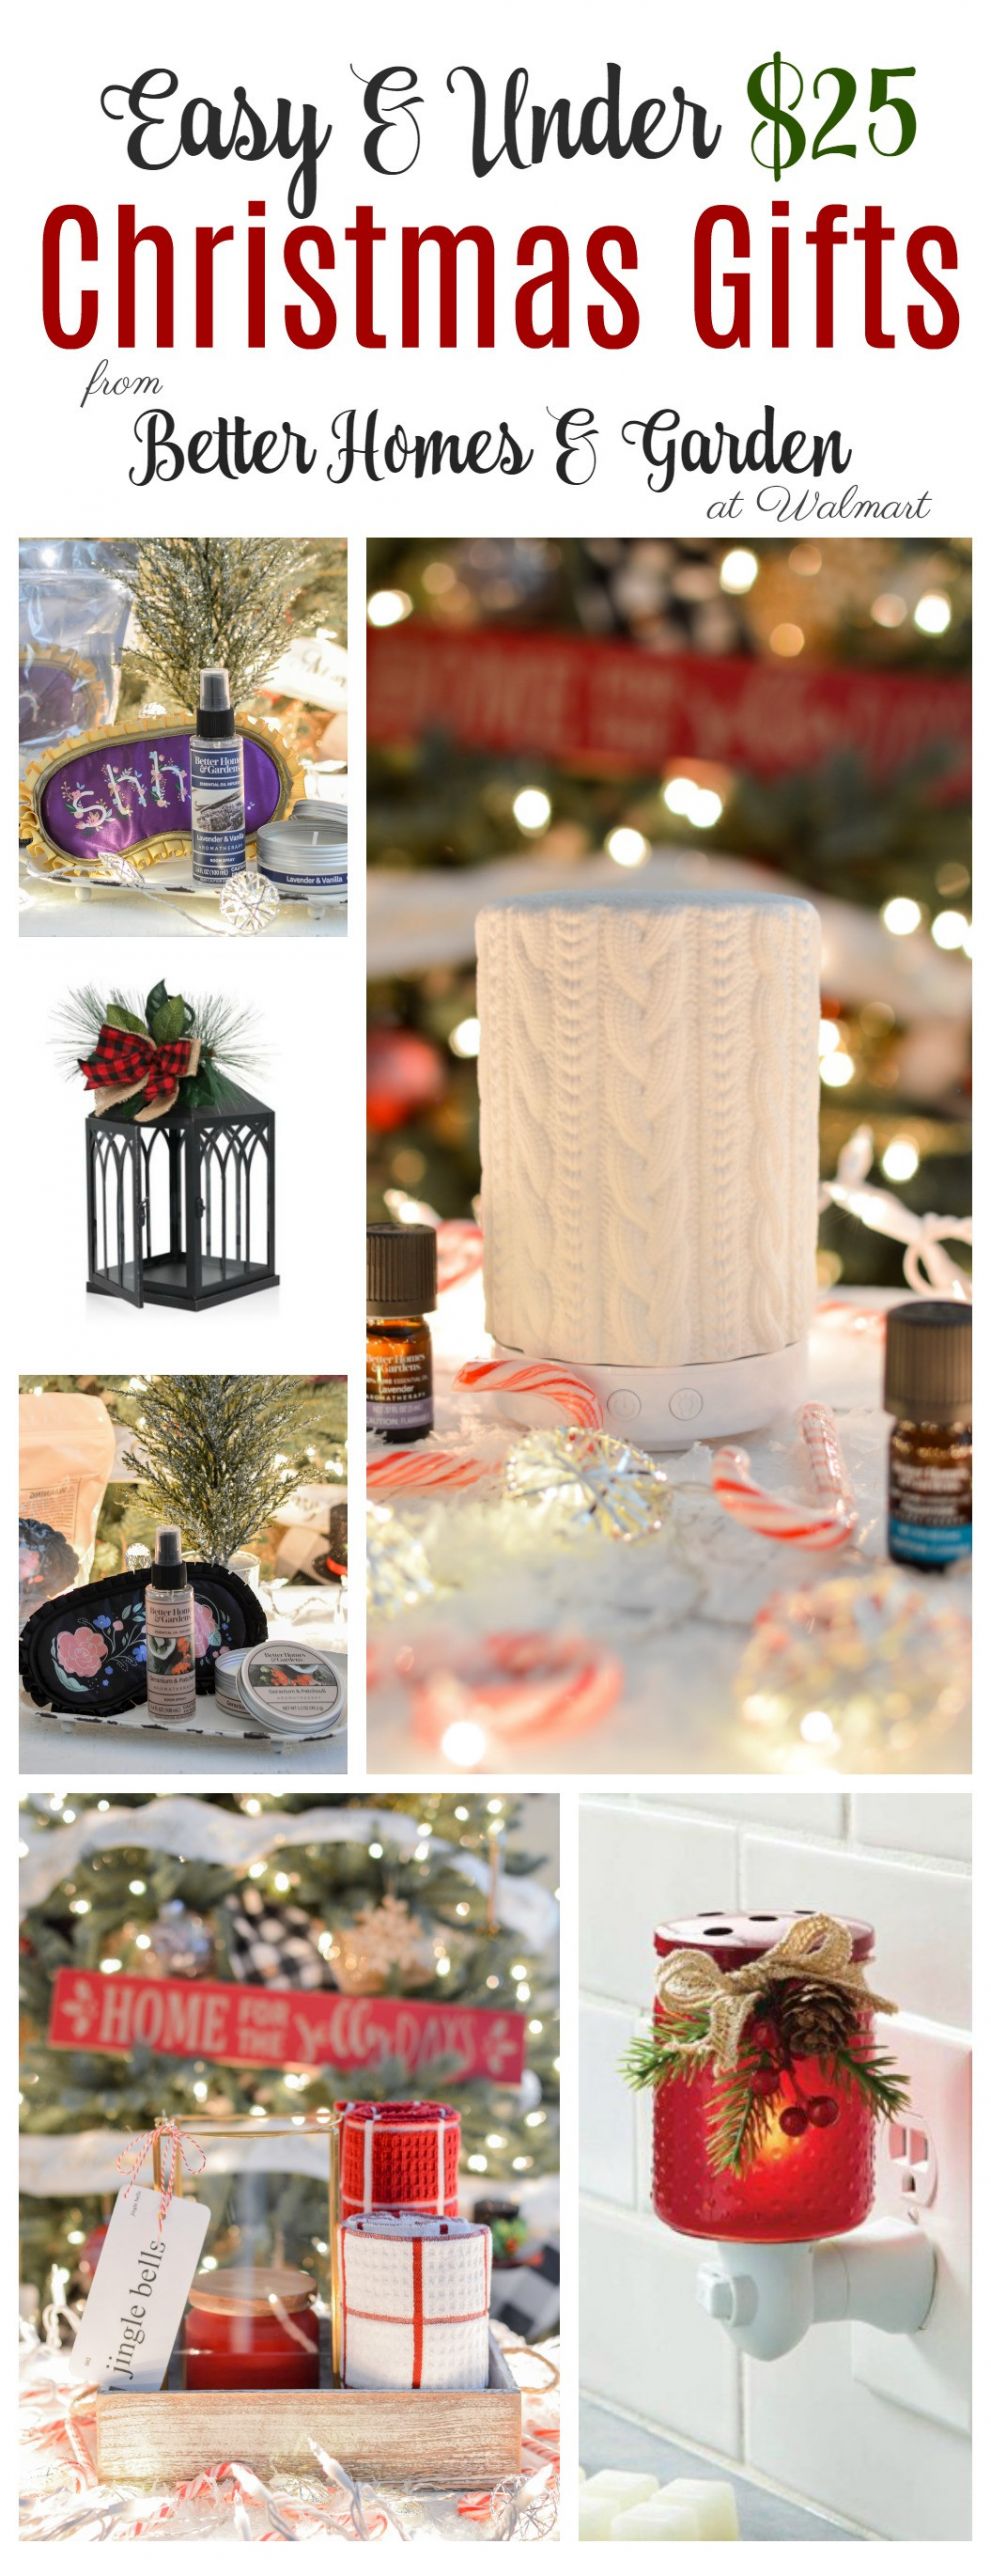 $25 Christmas Gifts
 Cute Christmas Gift Ideas Under $25 with Better Homes